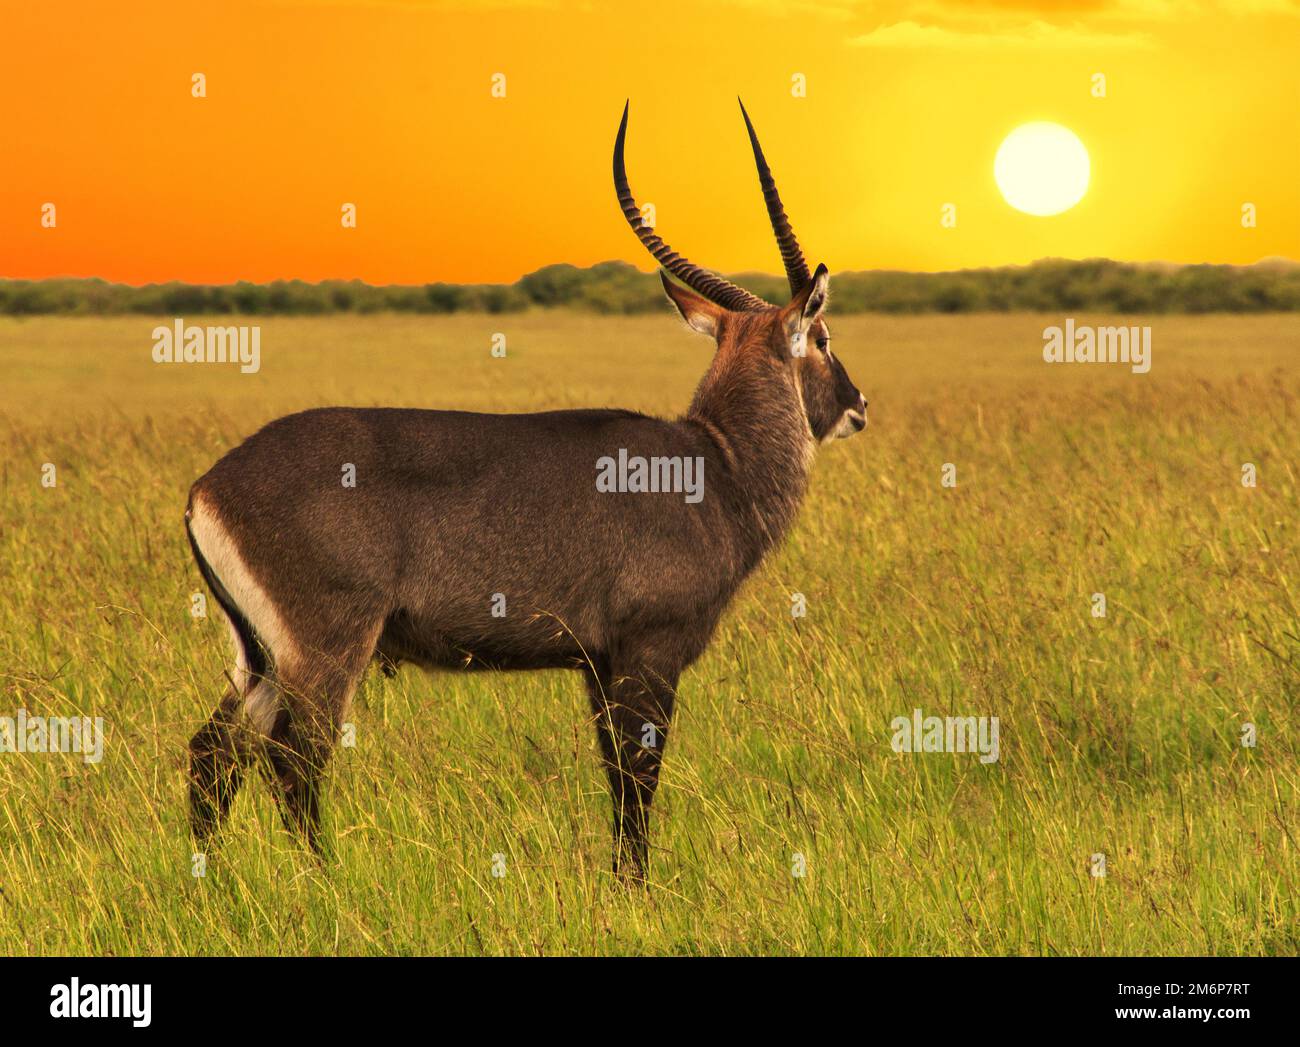 African antelope close -up in the savannah at sunset Stock Photo